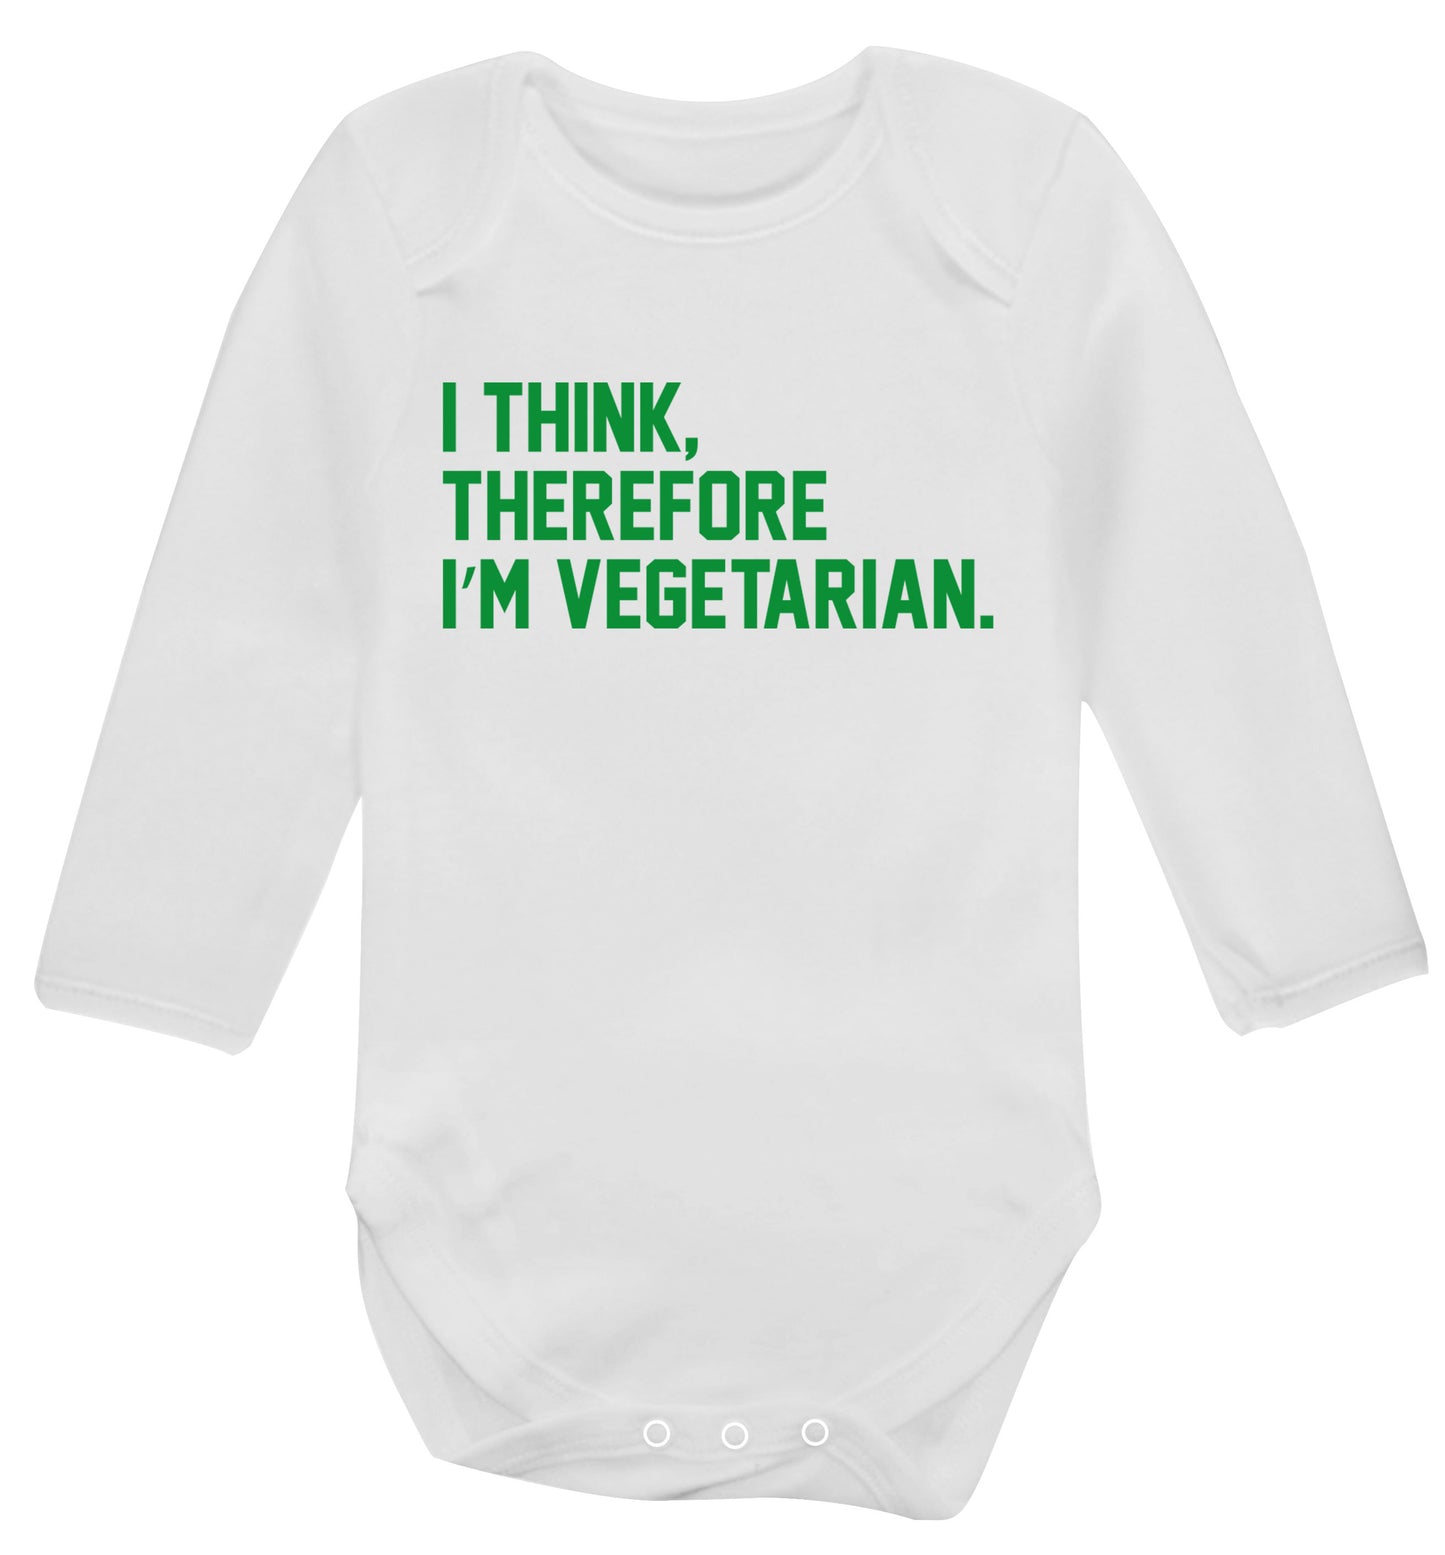 I think therefore I'm vegetarian Baby Vest long sleeved white 6-12 months